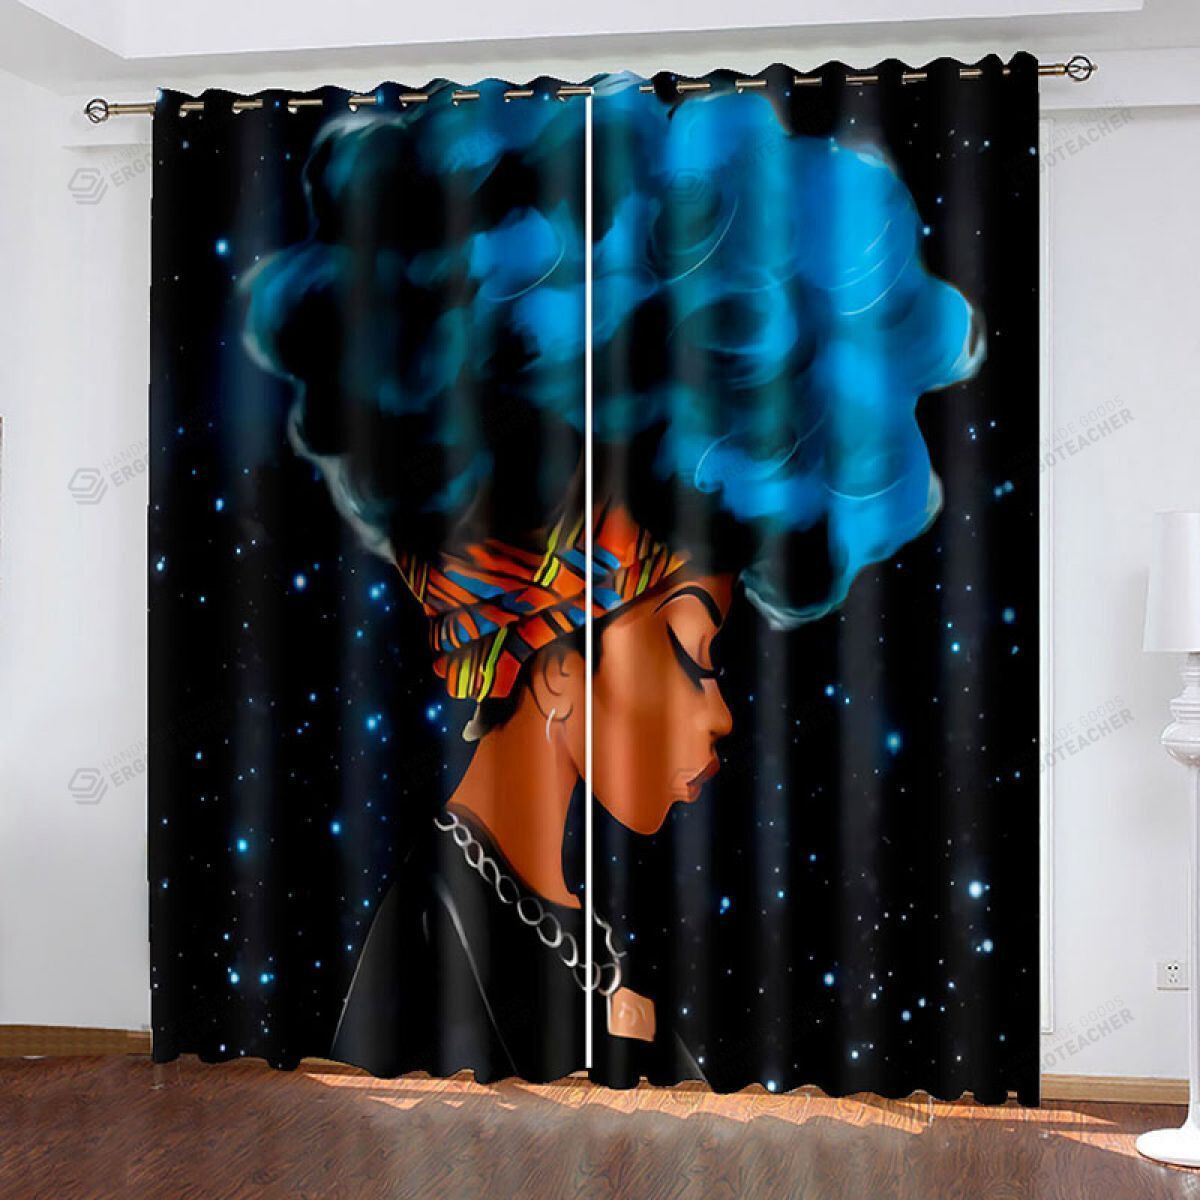 Woman With Blue Hair Blackout Thermal Grommet Window Curtains